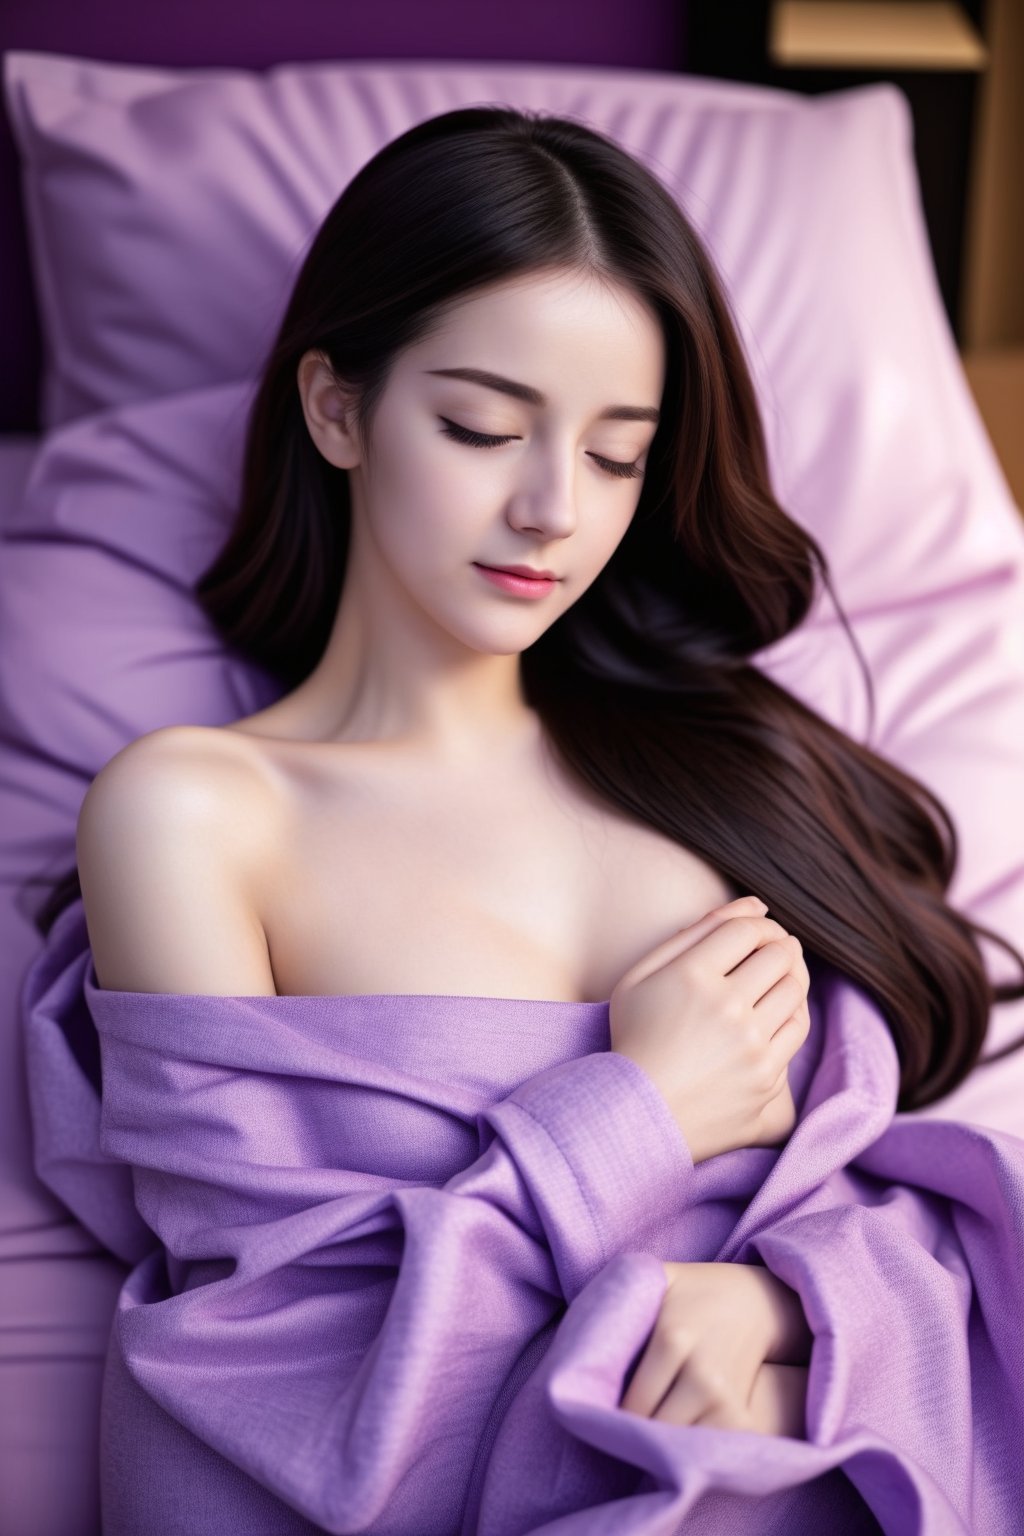 a cute girl , ((sleeping on a bed)), purple pastel pajamas, full body potrait of a photorealistic beautiful woman, complex, 8k resolution, fractal isometrics details bioluminescence, hypereallistic cover photo awesome full color, hand drawn, bright, gritty, realistic, davinci, erte .12k, intricate. hit definition , cinematic, mix of bold dark lines and loose lines, bold lines, on paper , real life human, happiness, mesmerizing face, 

,<lora:659111690174031528:1.0>